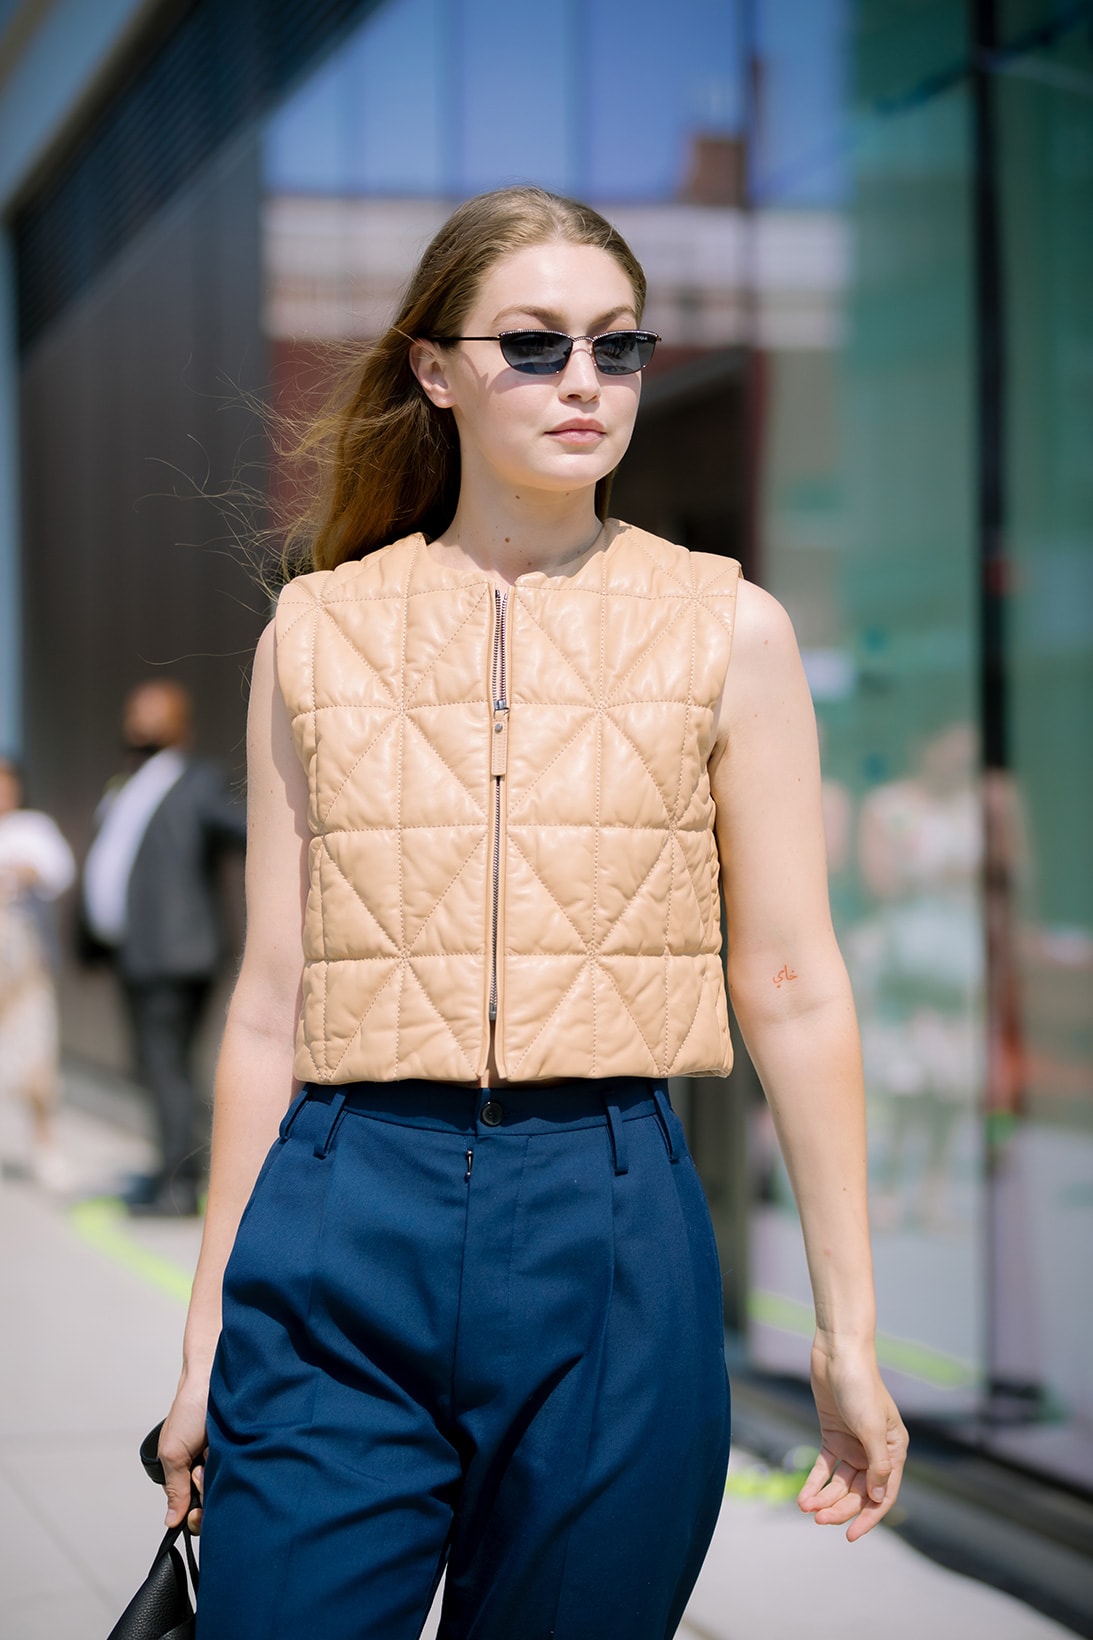 Gigi Hadid Beige Quilted Vest Sunglasses Model Celebrity Outfit New York Fashion Week SS22 Best Street Style Trends Spring Summer 2022 Influencers